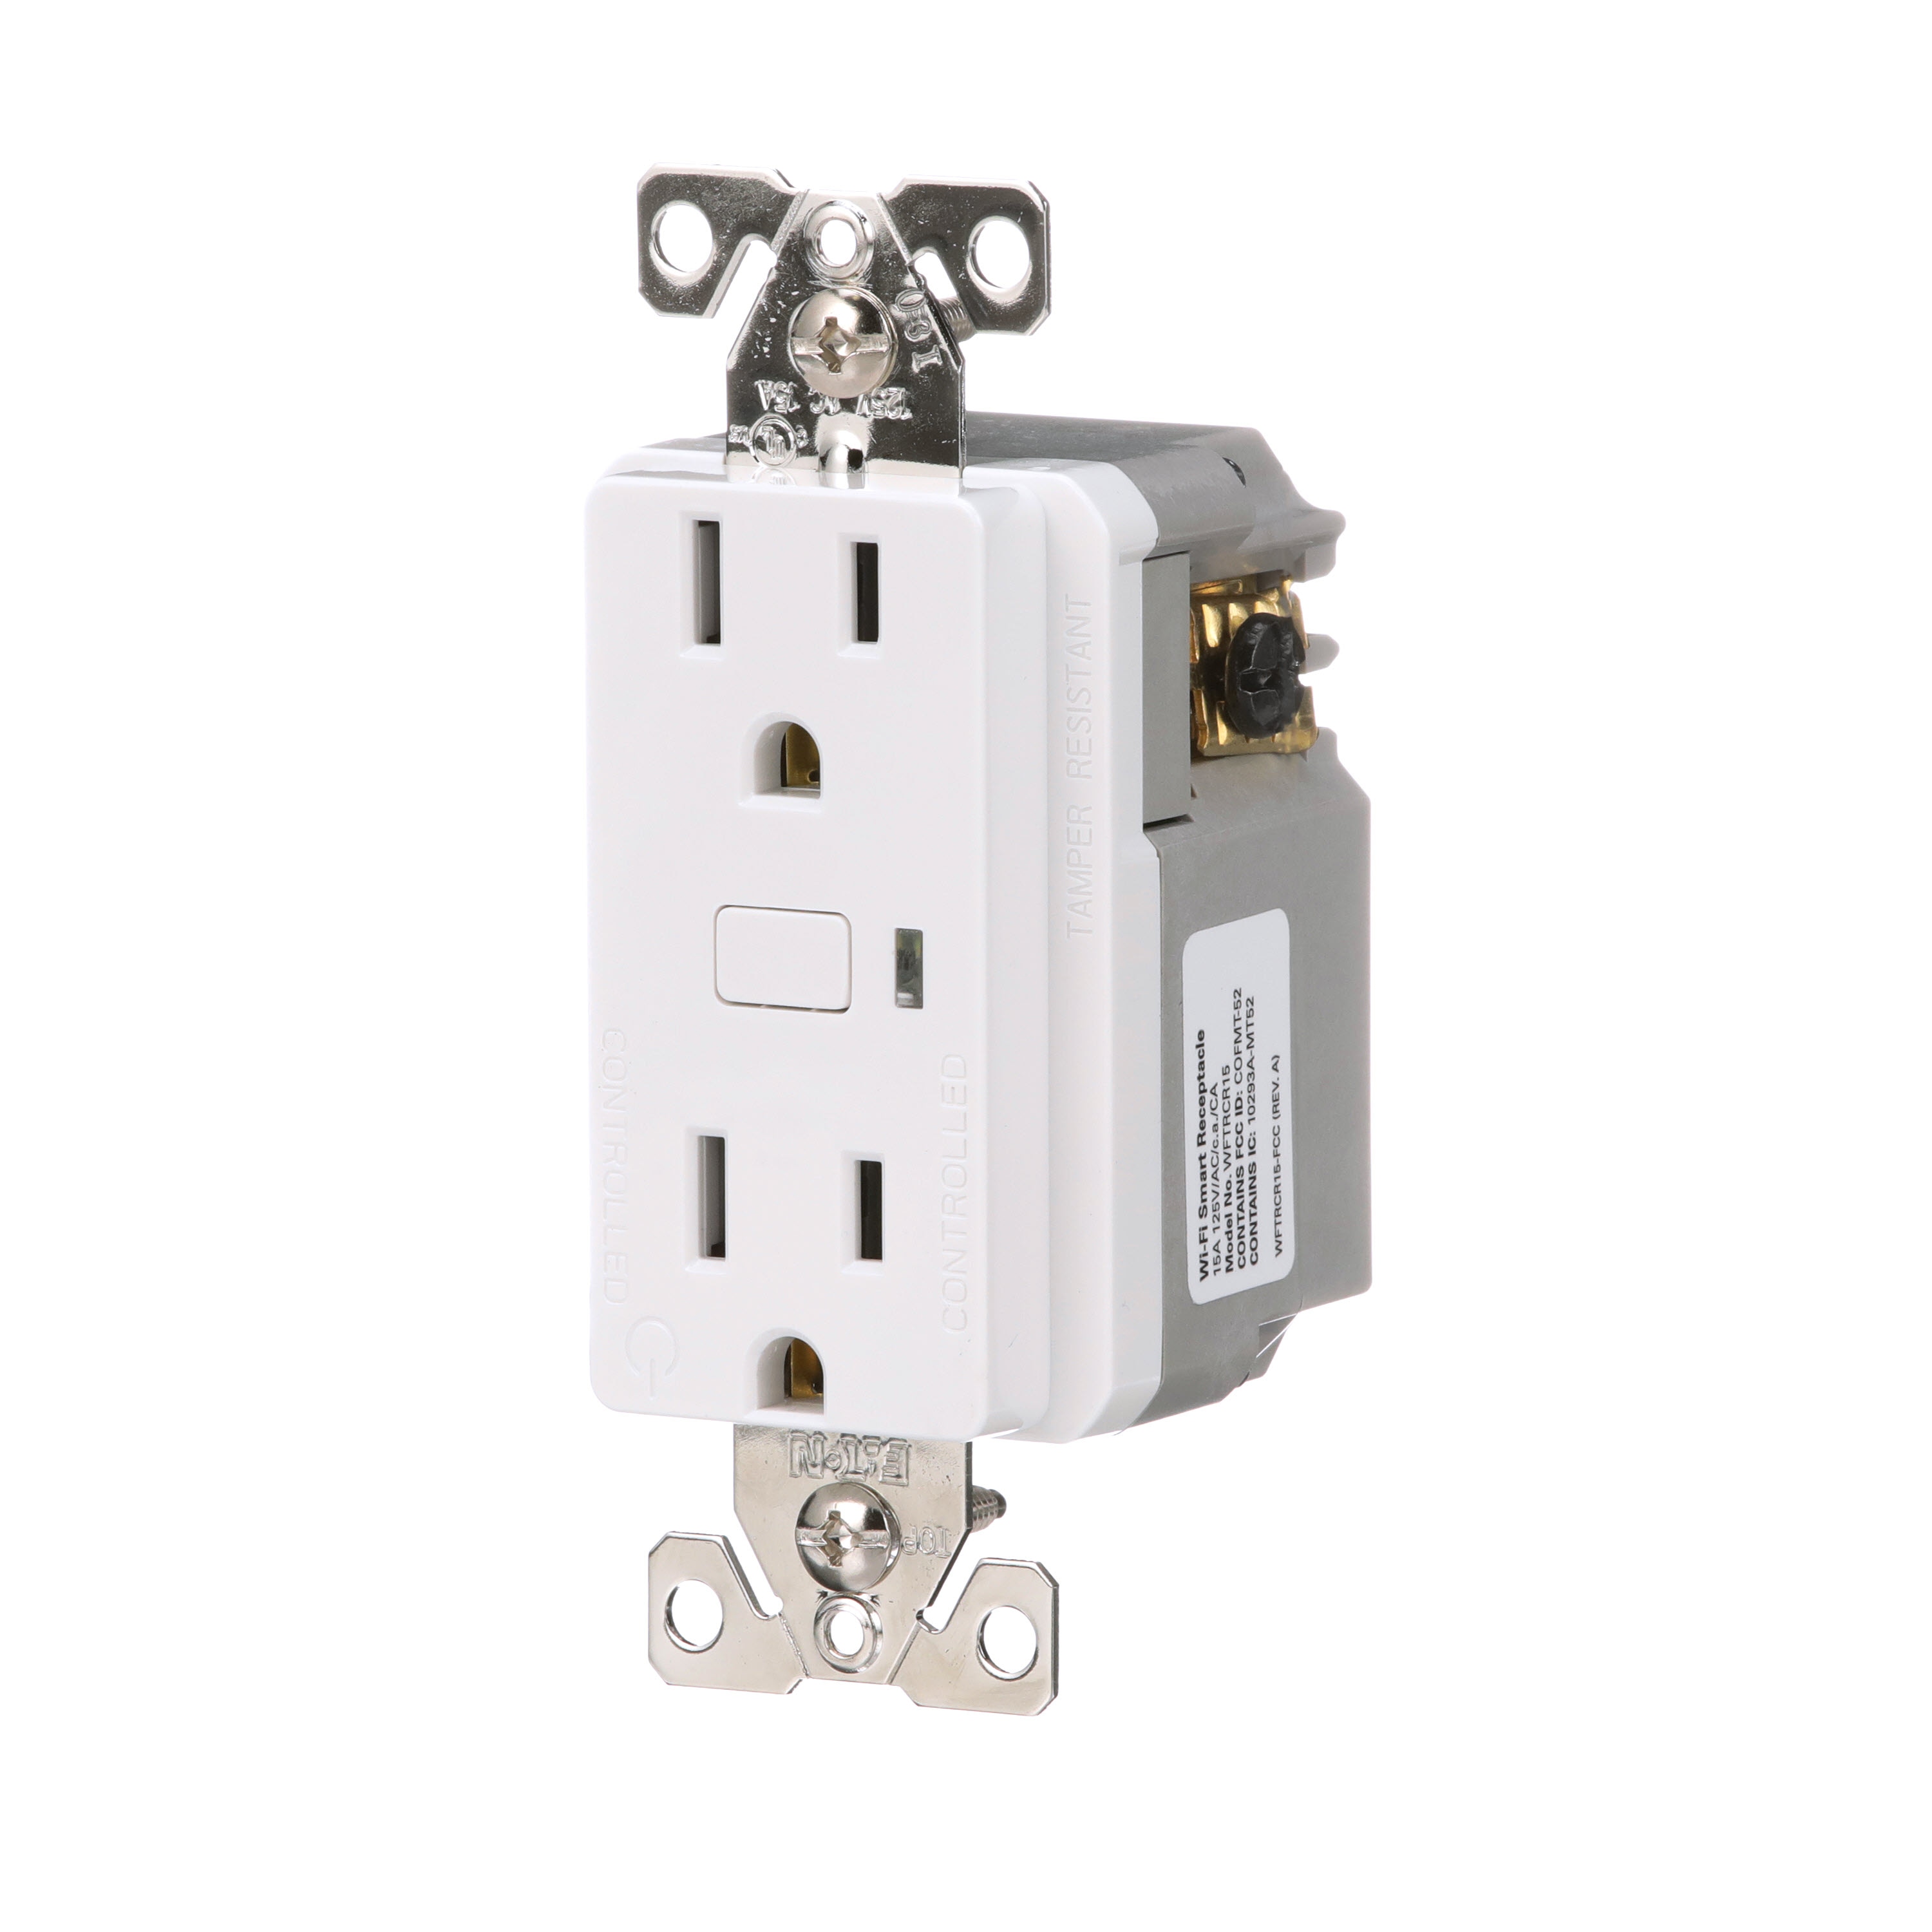 Customized 5ghz smart plug Remote Wall Switch Light Control For 2 Channel  Manufacturers, Suppliers, Factory - Made in China - NIE-TECH